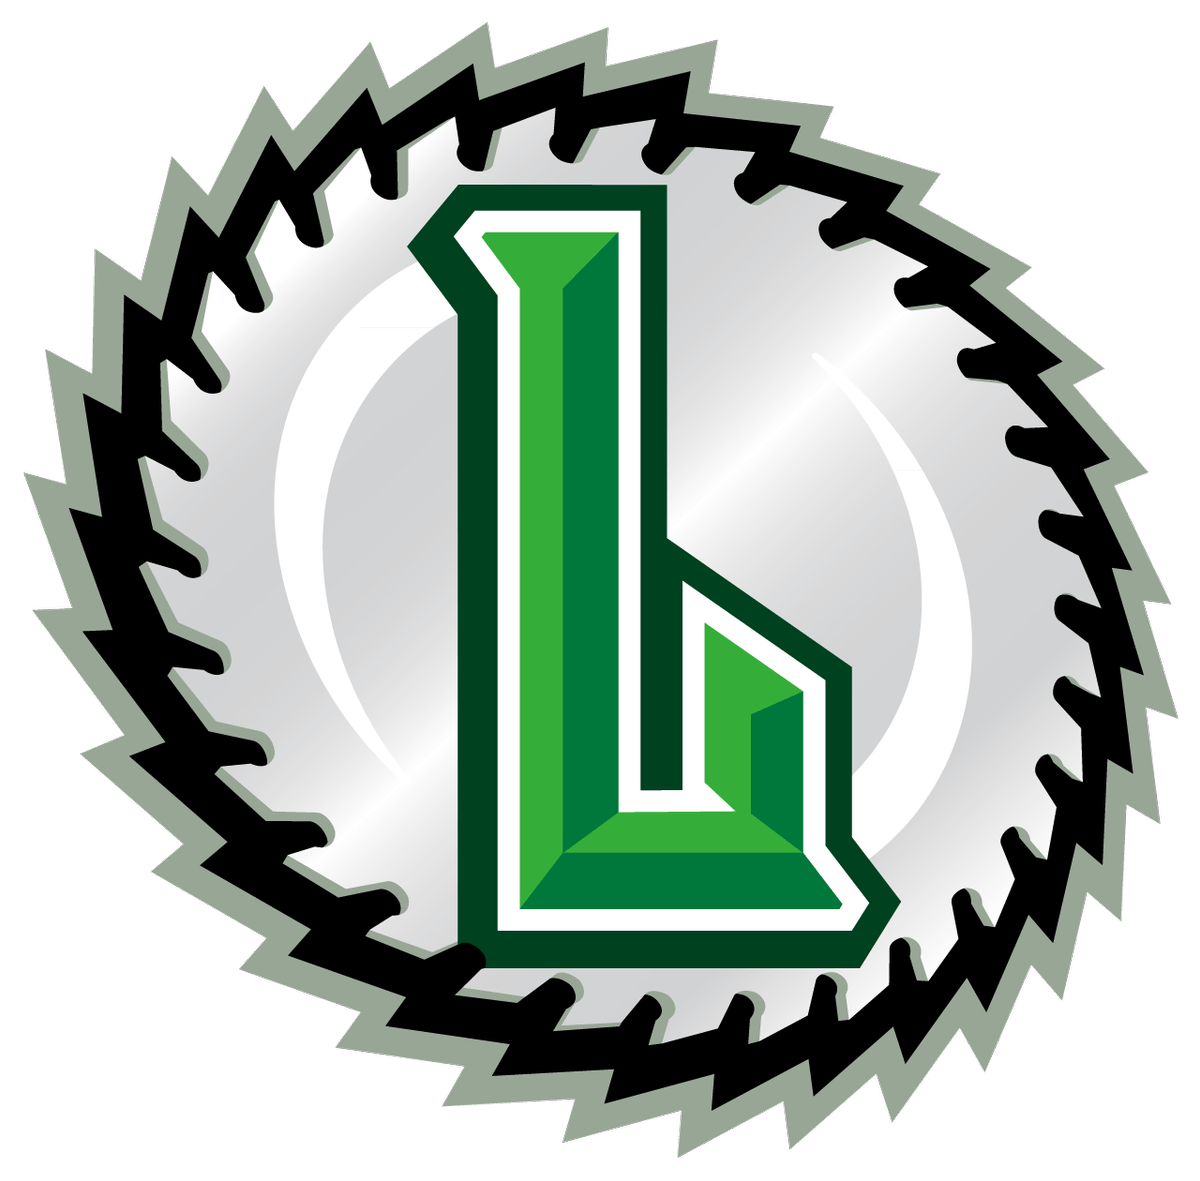 Loggers Logo - La Crosse Loggers out our new primary Loggers